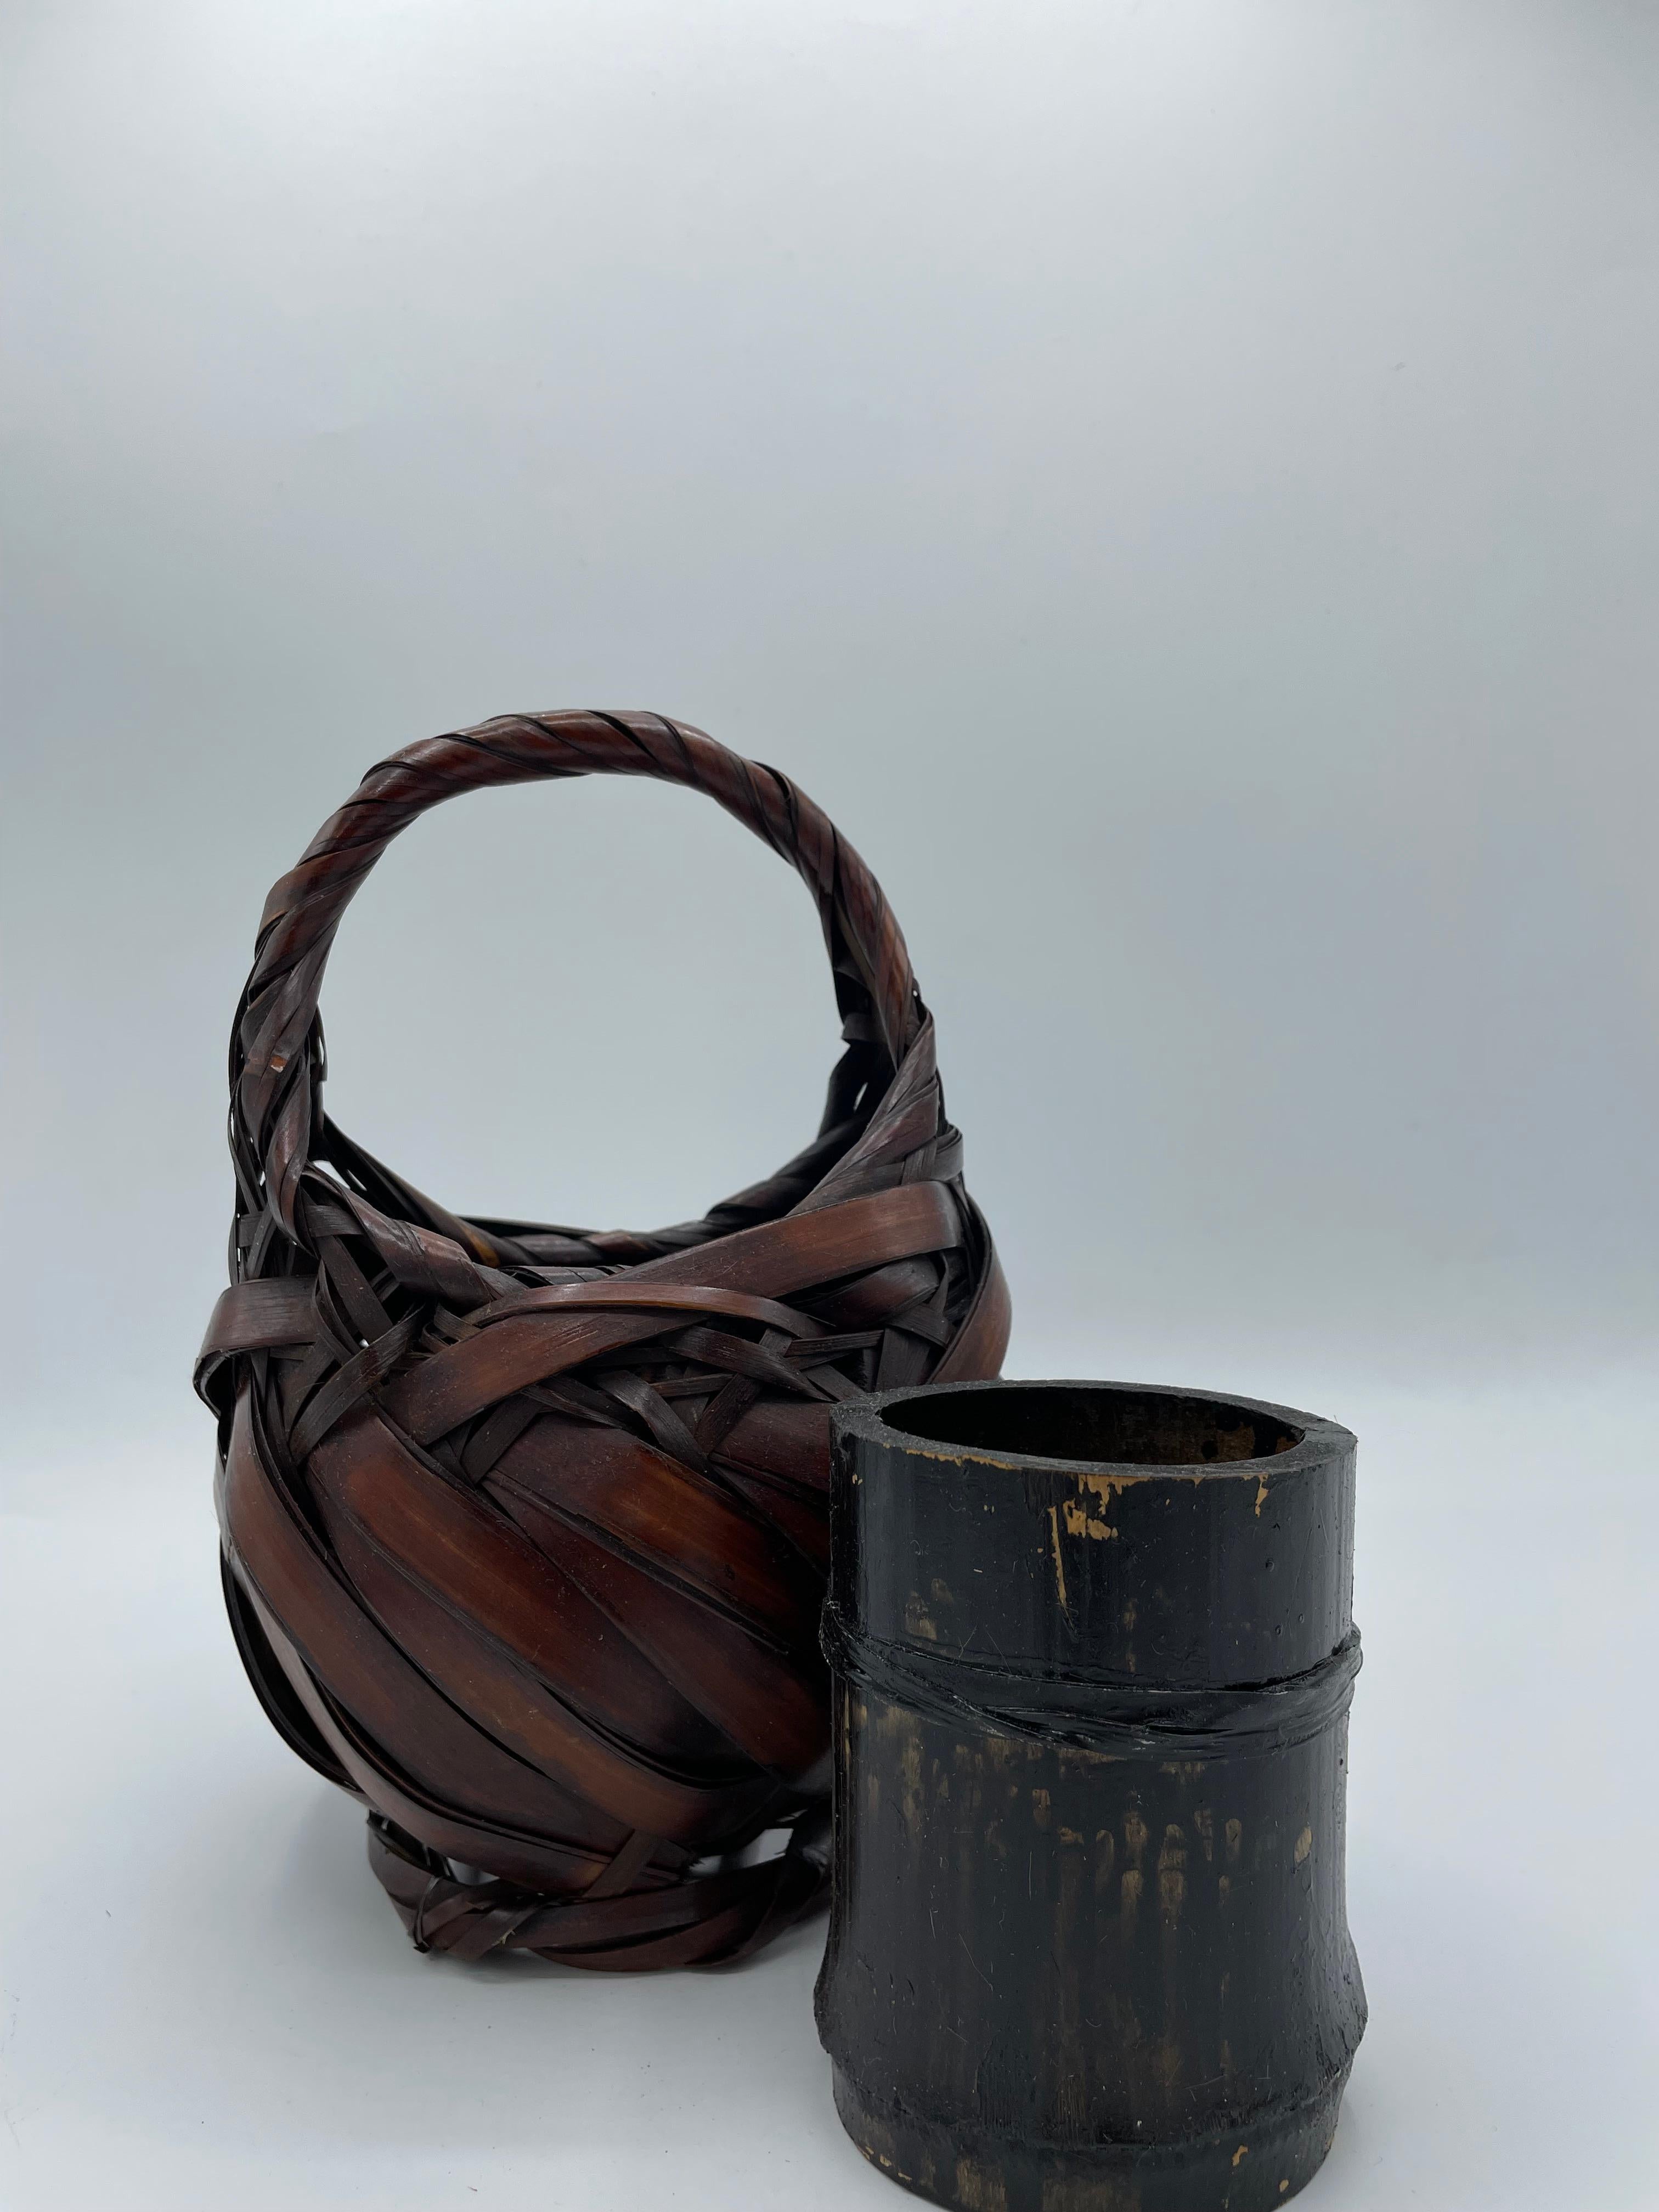 20th Century Japanese Antique Bamboo Brown Basket and Flower Vase 1920s